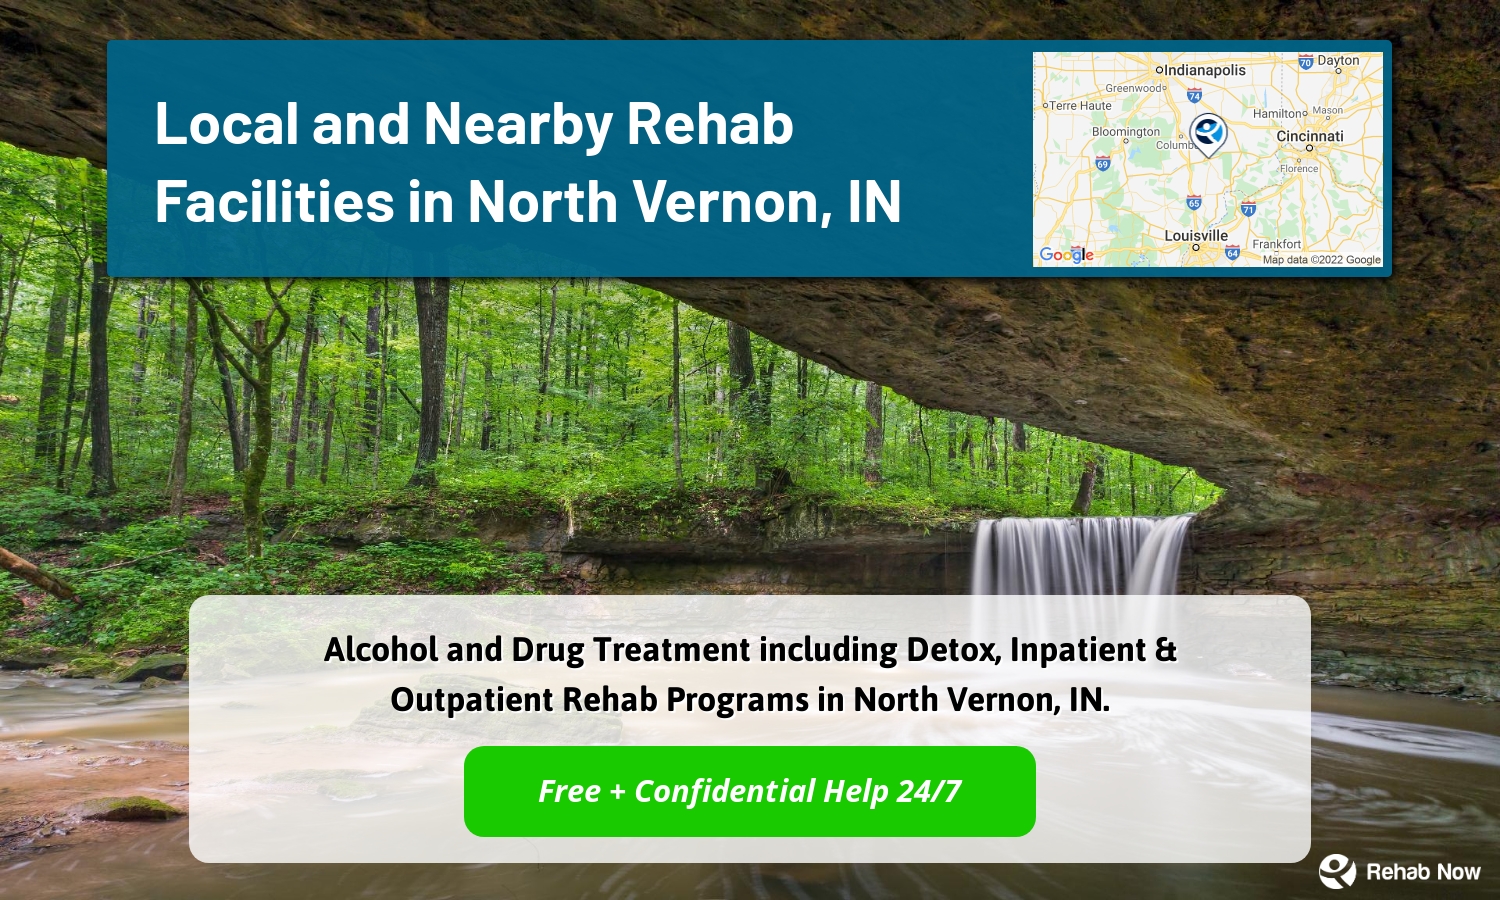 Alcohol and Drug Treatment including Detox, Inpatient & Outpatient Rehab Programs in North Vernon, IN.